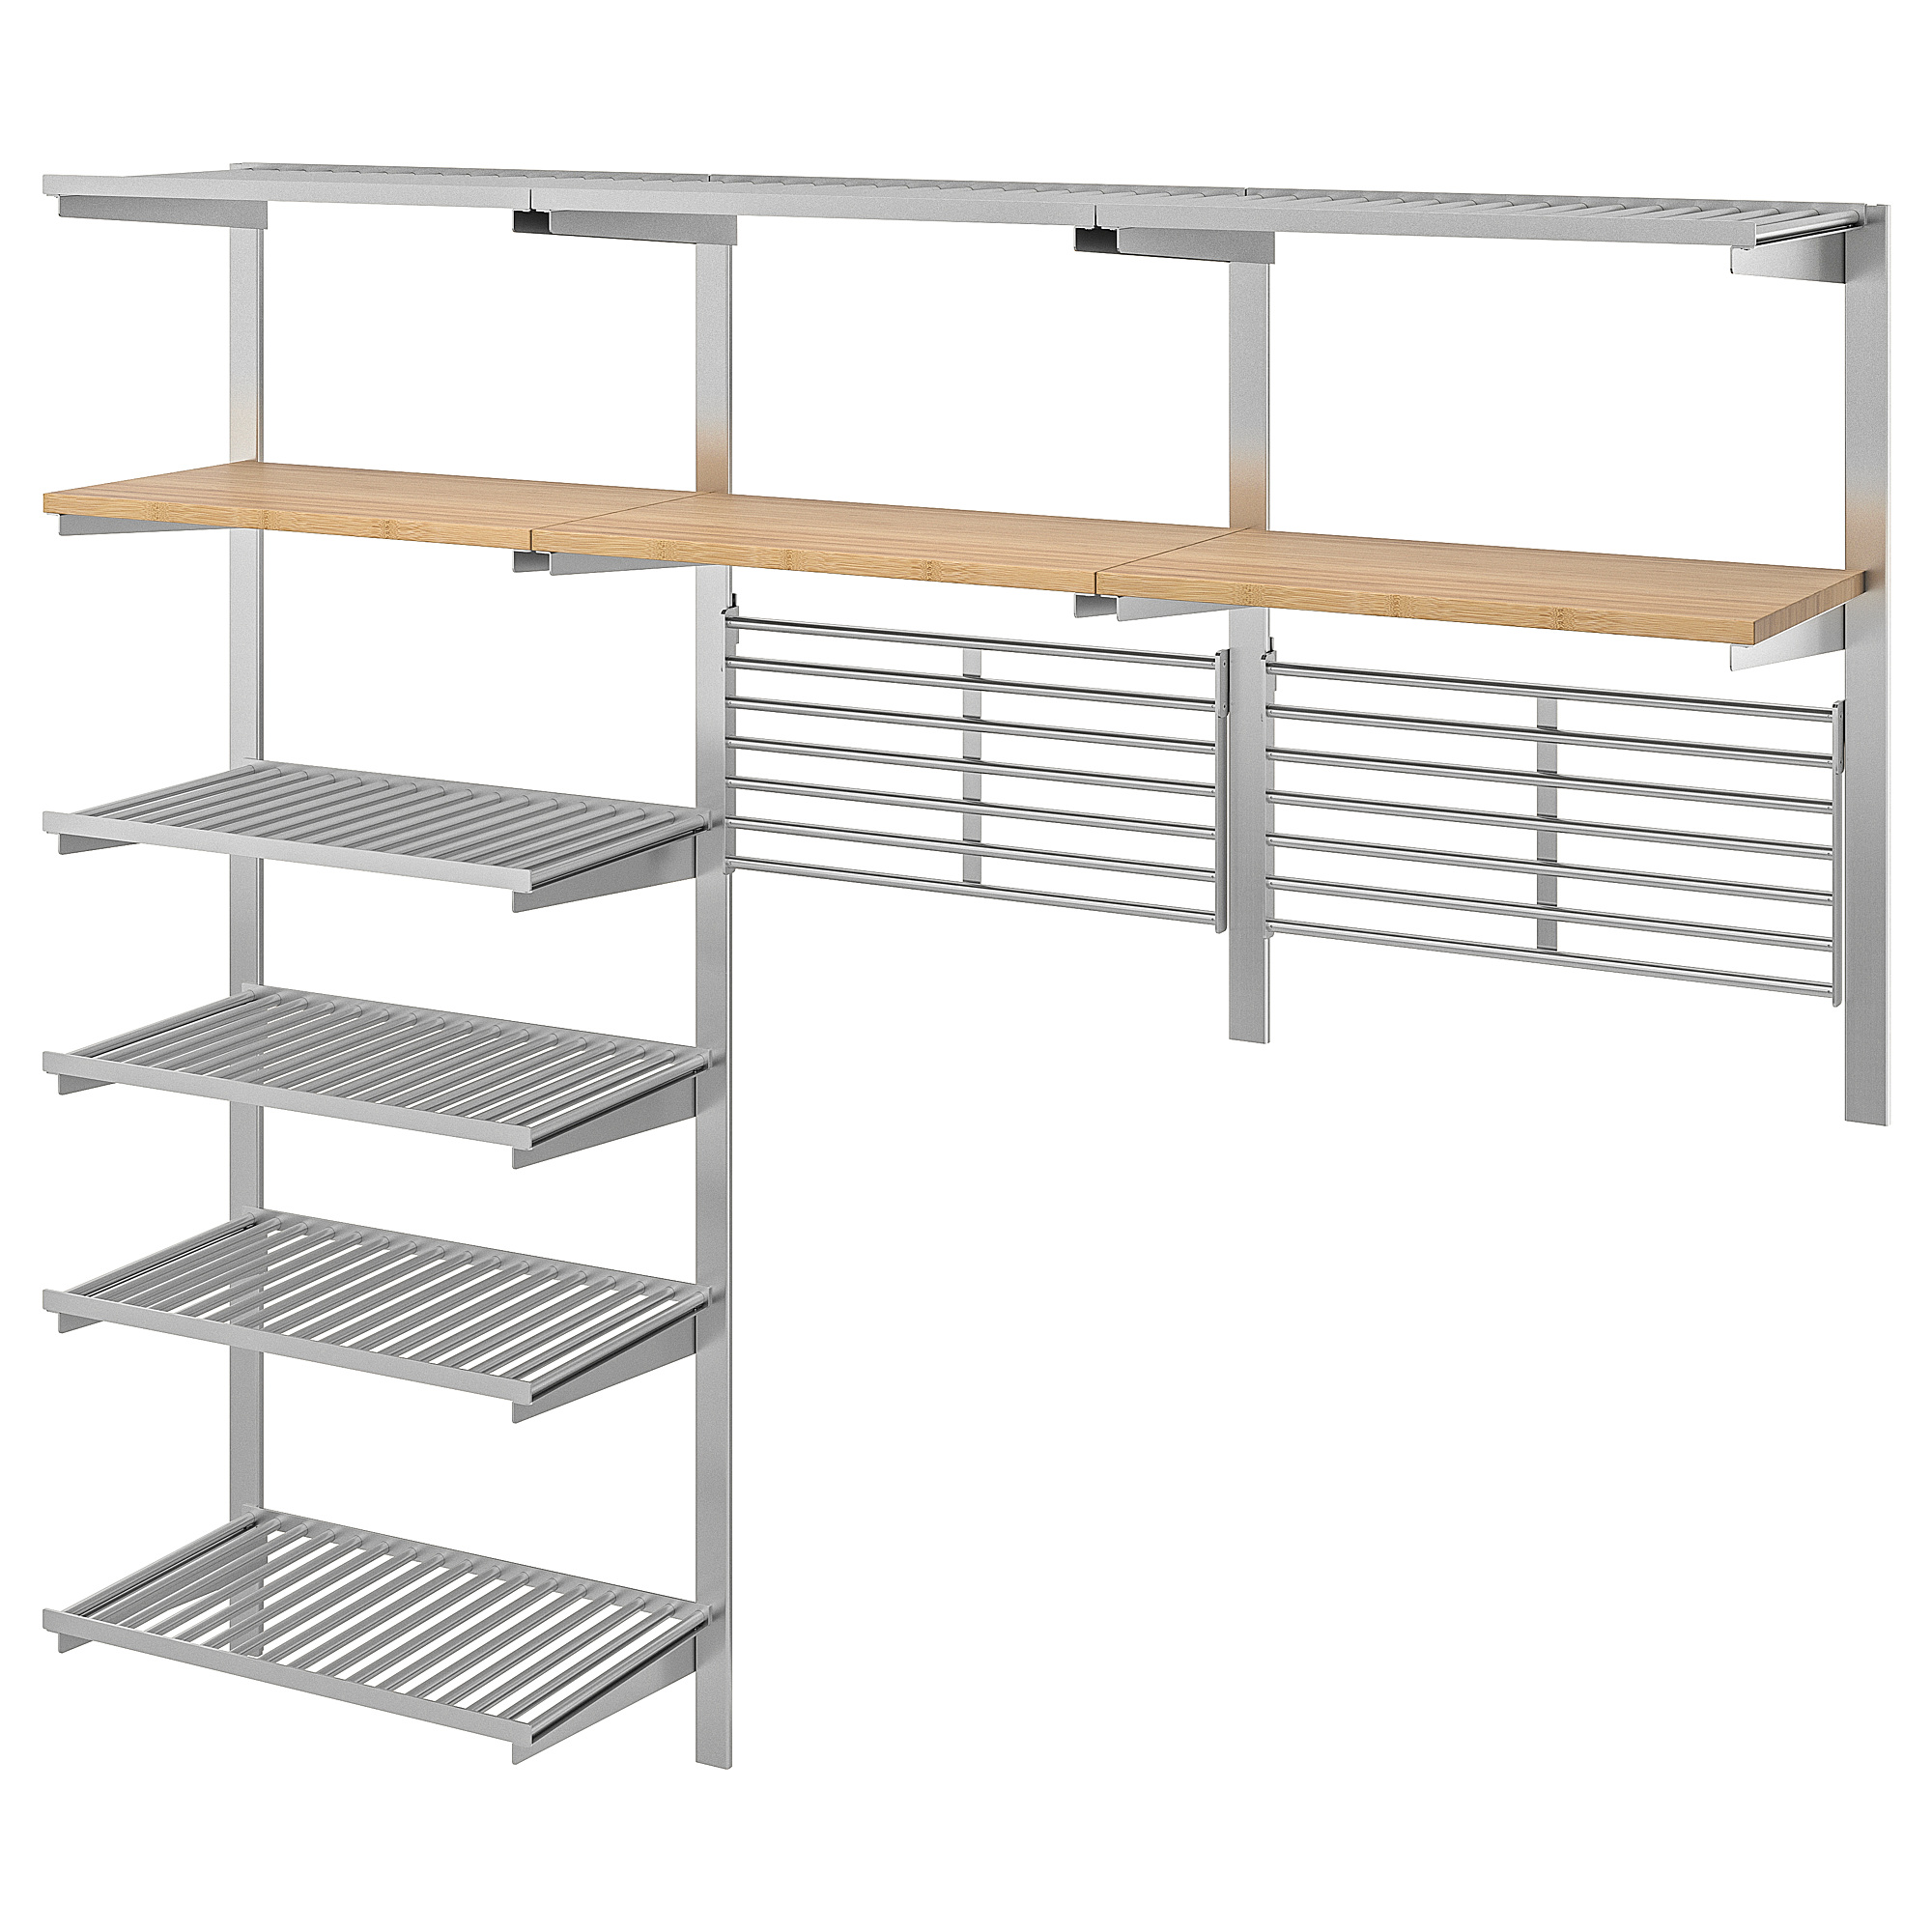 KUNGSFORS suspension rail w shelves/wll grids